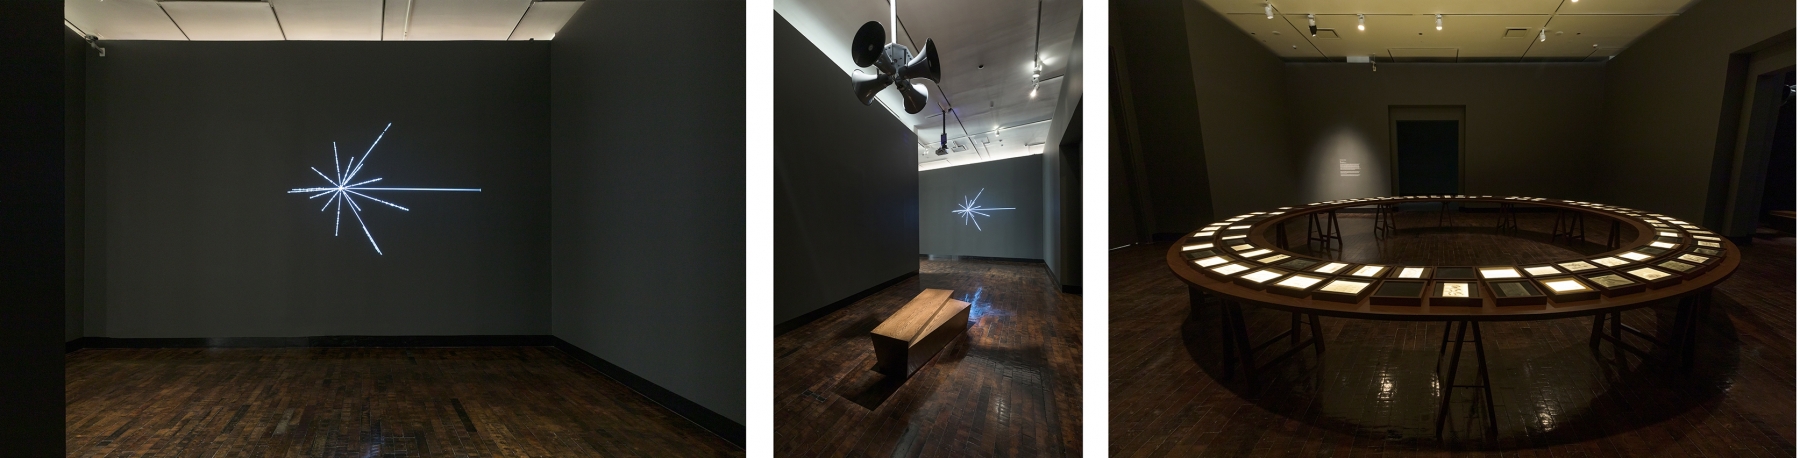 Three installation views of the artwork at the Frist Art Museum. From left to right: an image of the solar location map sculpture, vertical beams of light hanging from ceiling, an image of a bench below a four-horned speaker, and an image of a round wood table with documents placed on top.